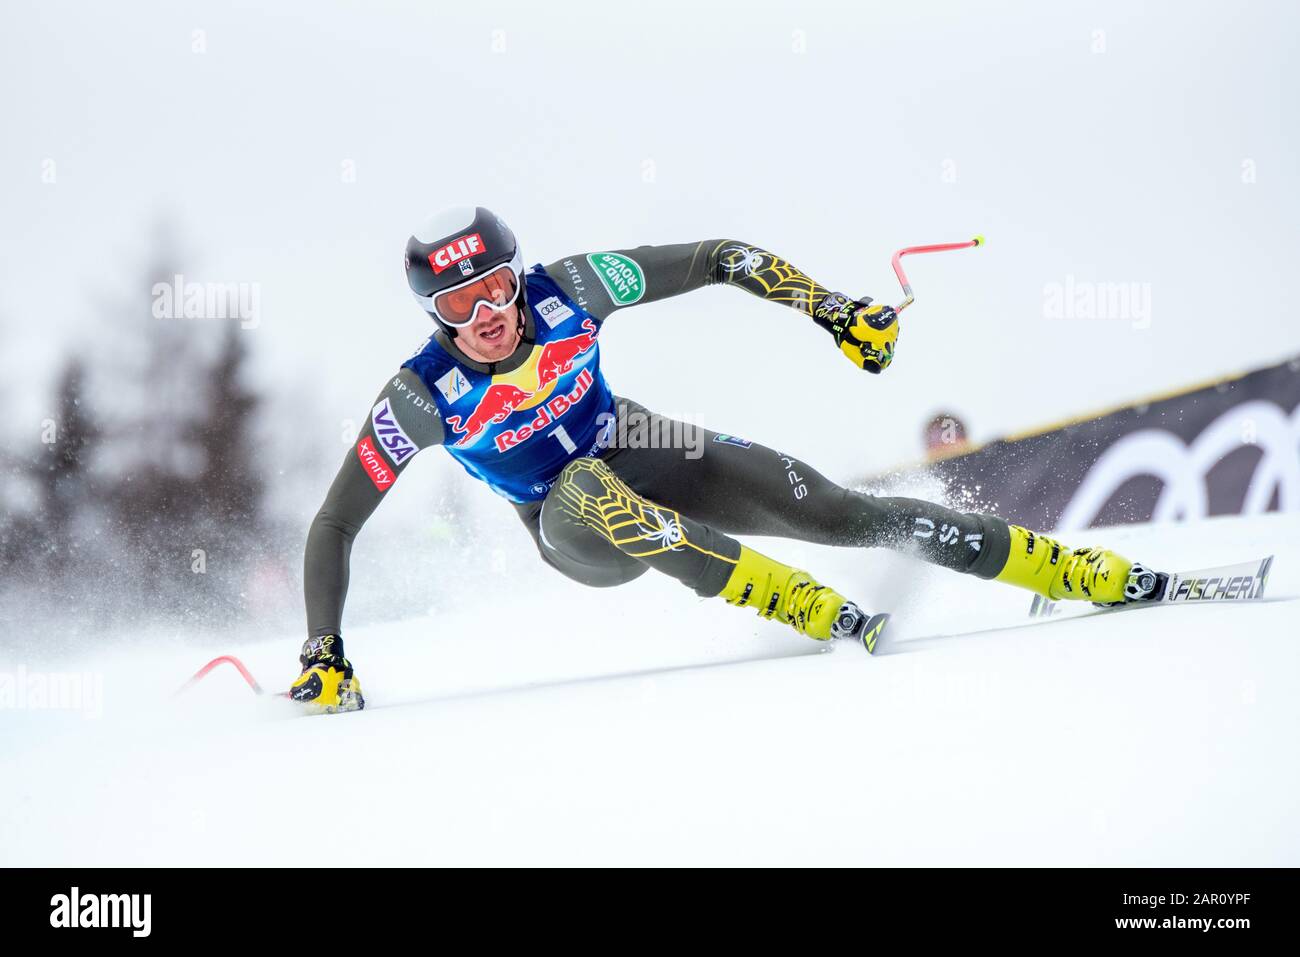 Bryce Bennett of United States of America at the Ski Alpin: 80. Hahnenkamm Race 2020 - Audi FIS Alpine Ski World Cup - Men's Downhill at the Streif on January 25, 2020 in Kitzbuehel, AUSTRIA. Credit: European Sports Photographic Agency/Alamy Live News Stock Photo